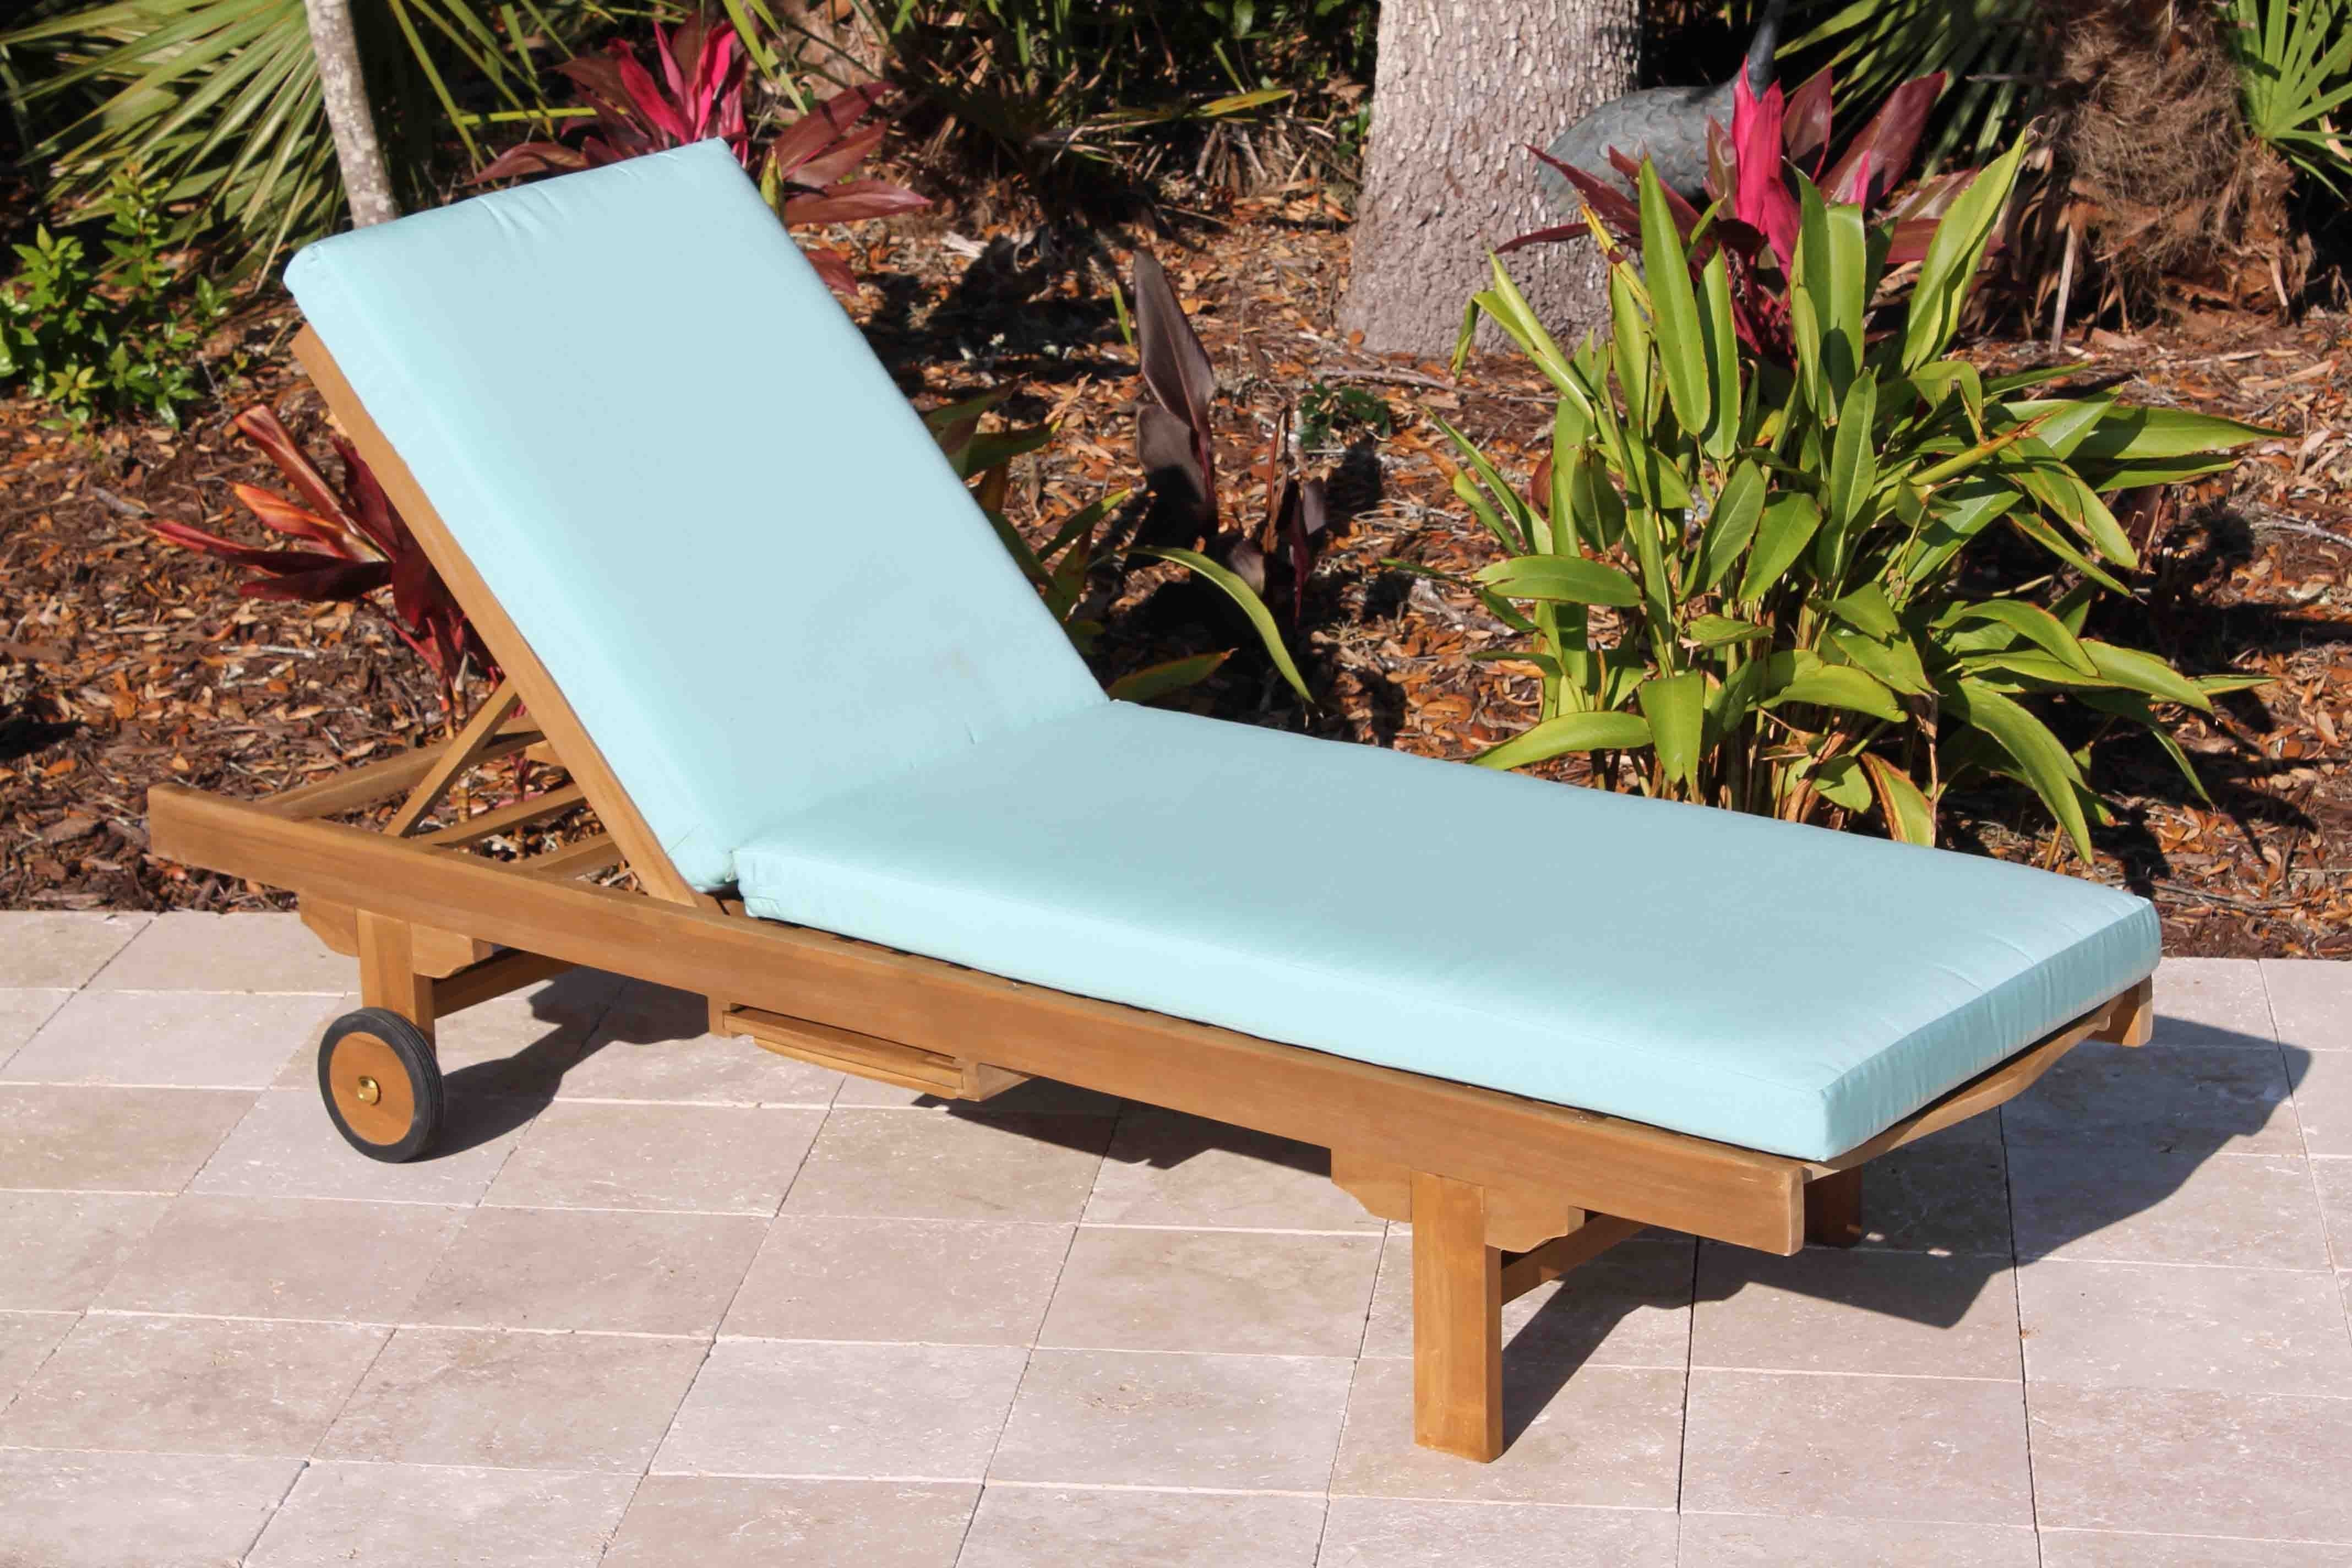 2022 Best Of Sams Club Outdoor Chaise Lounge Chairs